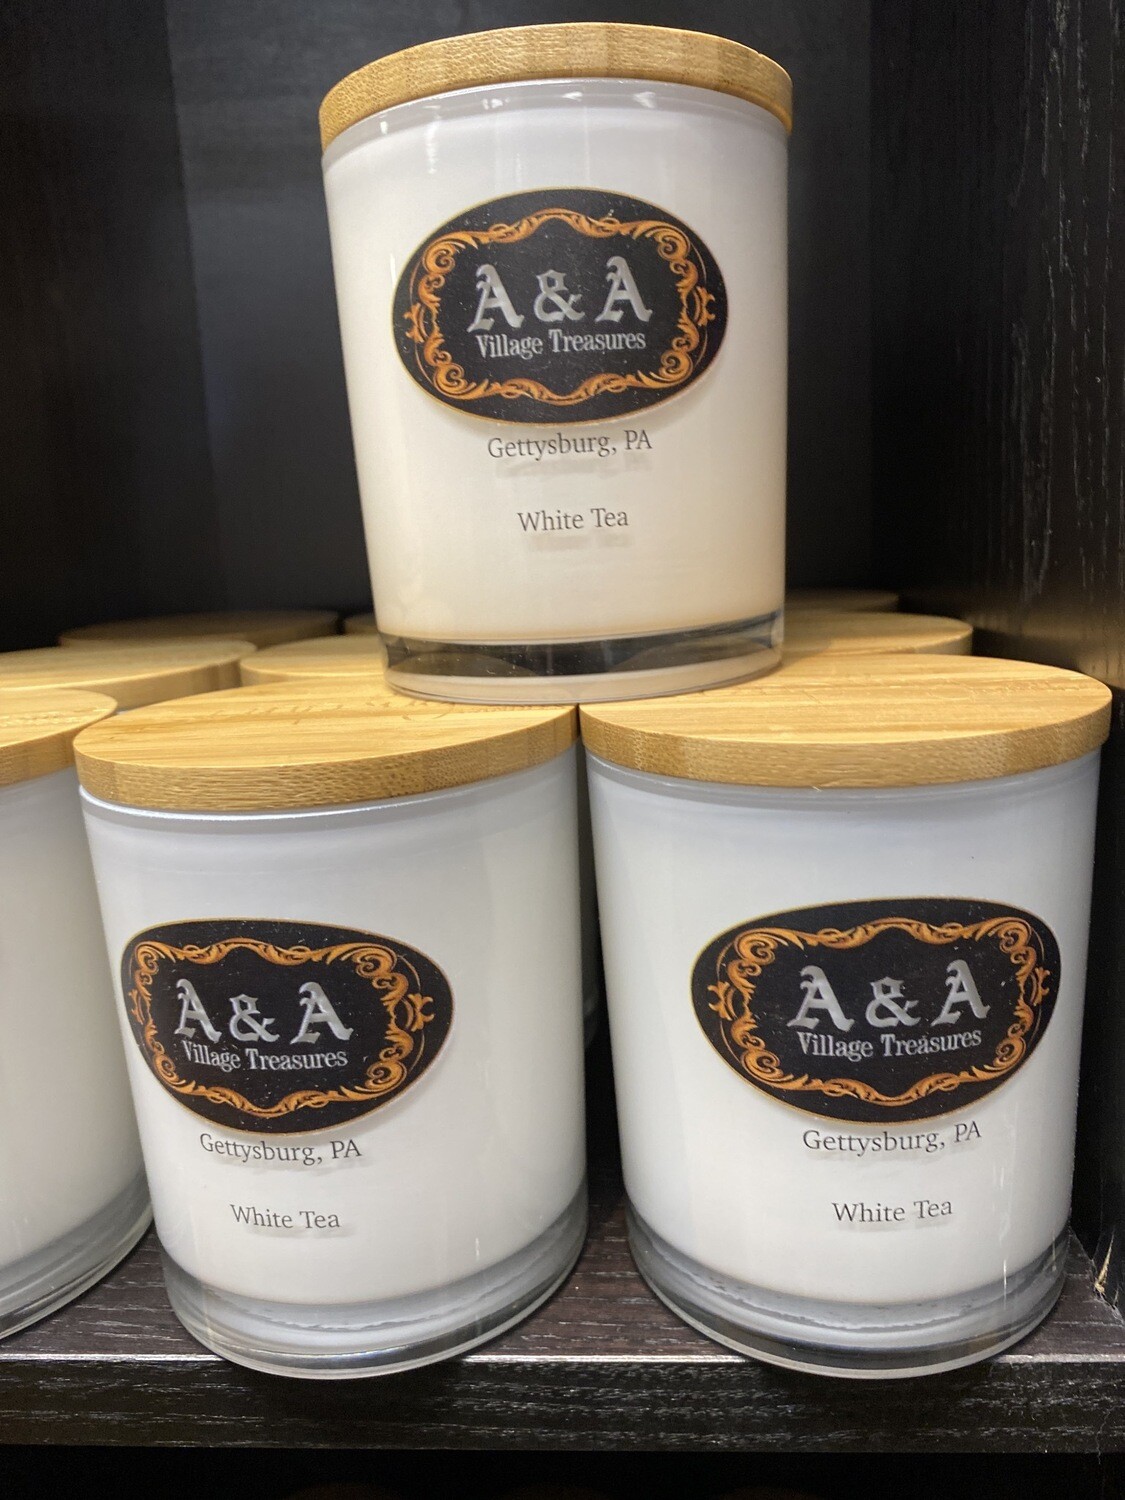 A&A Signature Gettysburg, PA Candle White Tea Scent 100% Soy Made In USA 11.5 oz